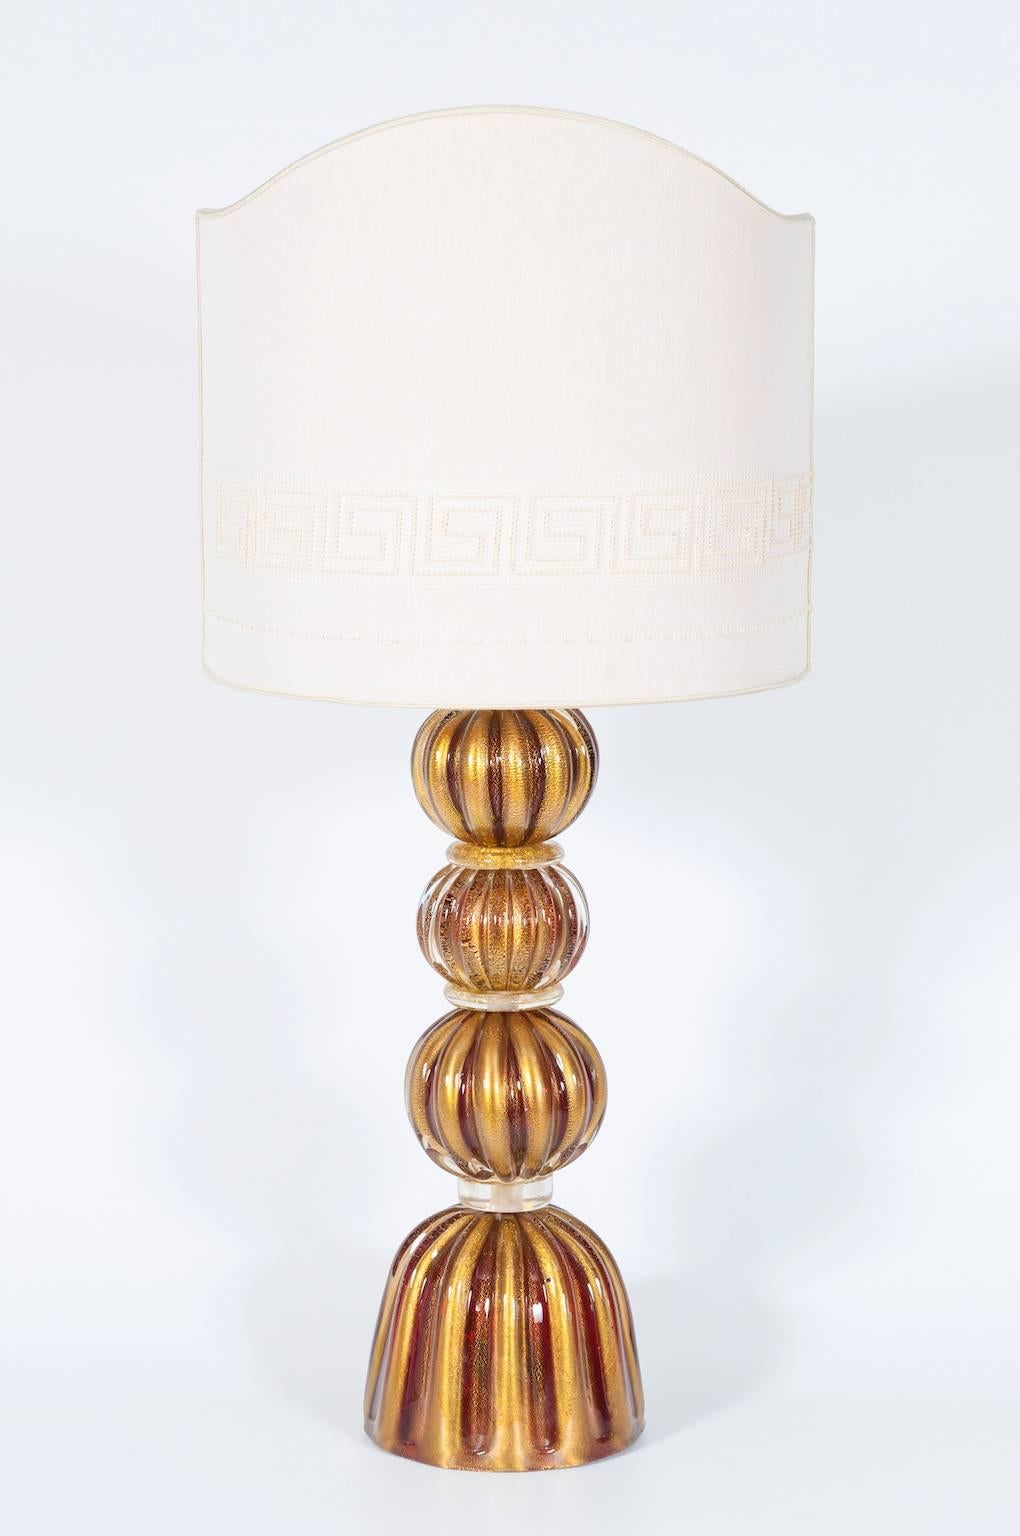 A Delicate Charming Murano Glass Table Lamp with Ruby Spheres and Gold Accents 1980s Italy.
This enchanting table lamp, crafted entirely by hand from Murano glass, exudes elegance and timelessness. The lamp's design features three gently ribbed